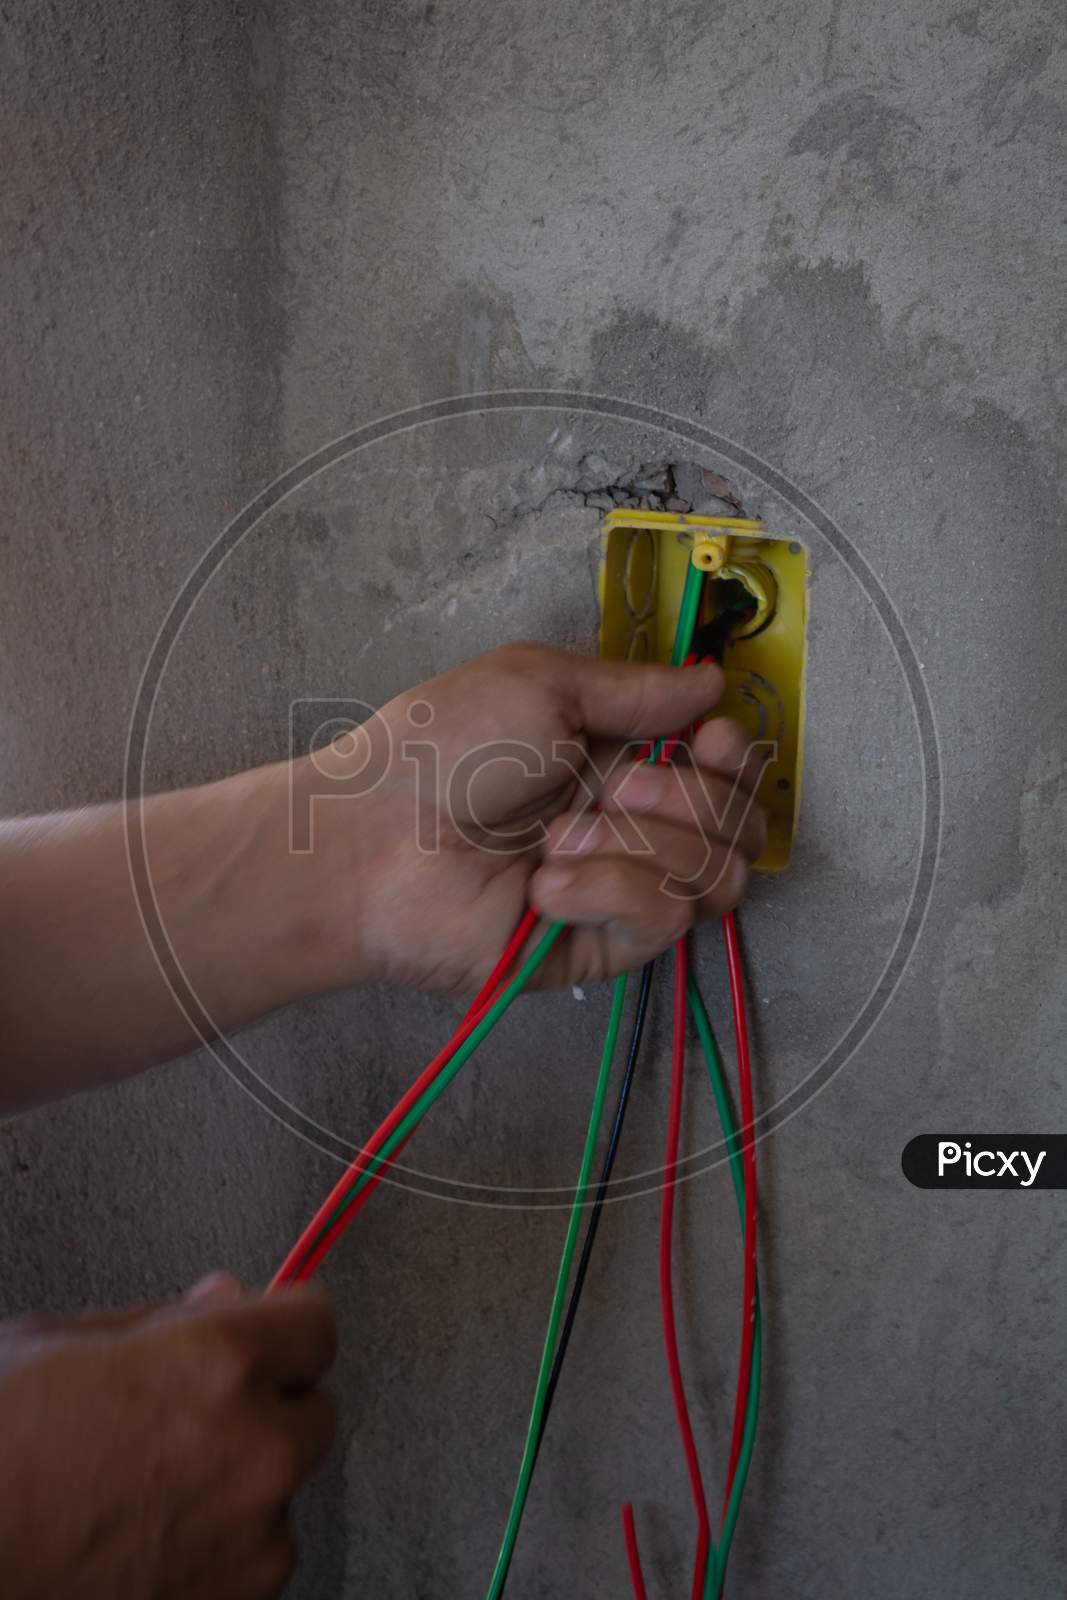 Electrician Working On A Construction Site. Electrical Wiring In A Construction.